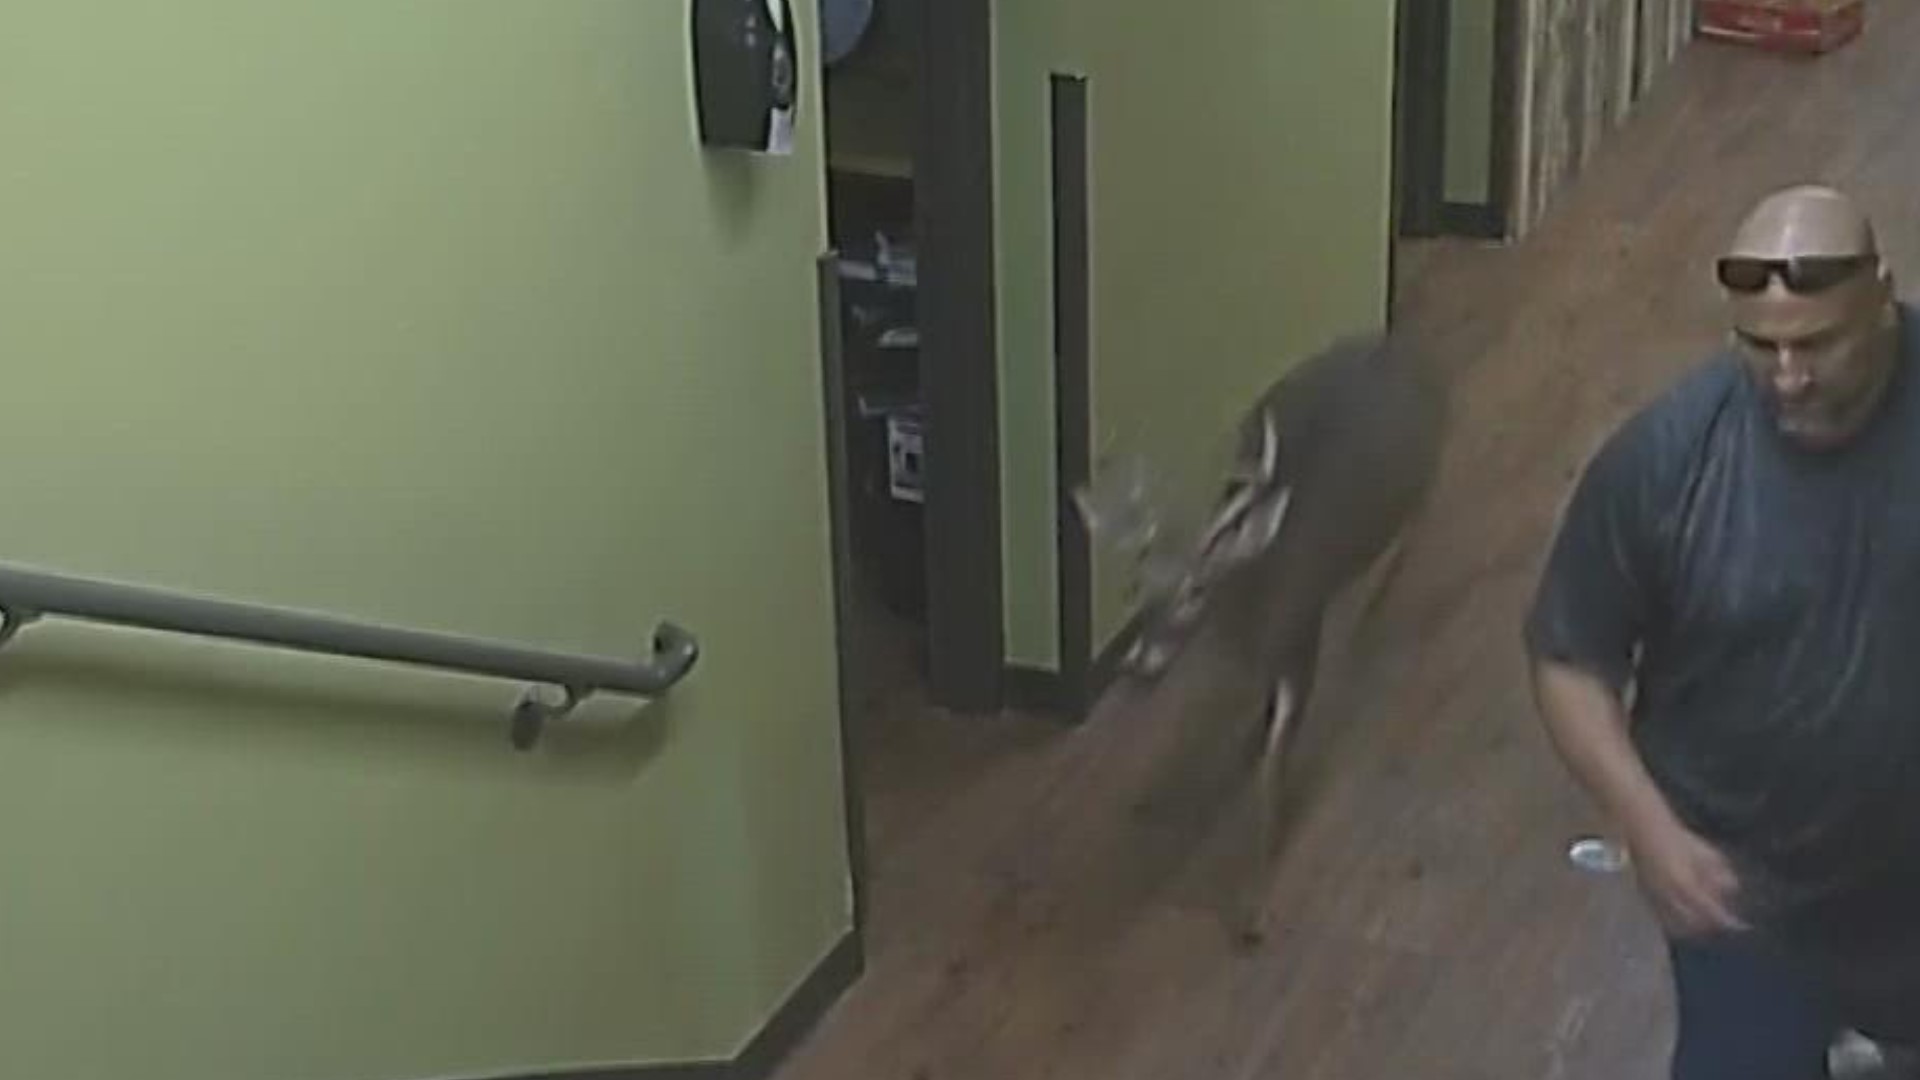 The deer was confused and startled but a team at the church was able to safely lure him out of the building and back outside.